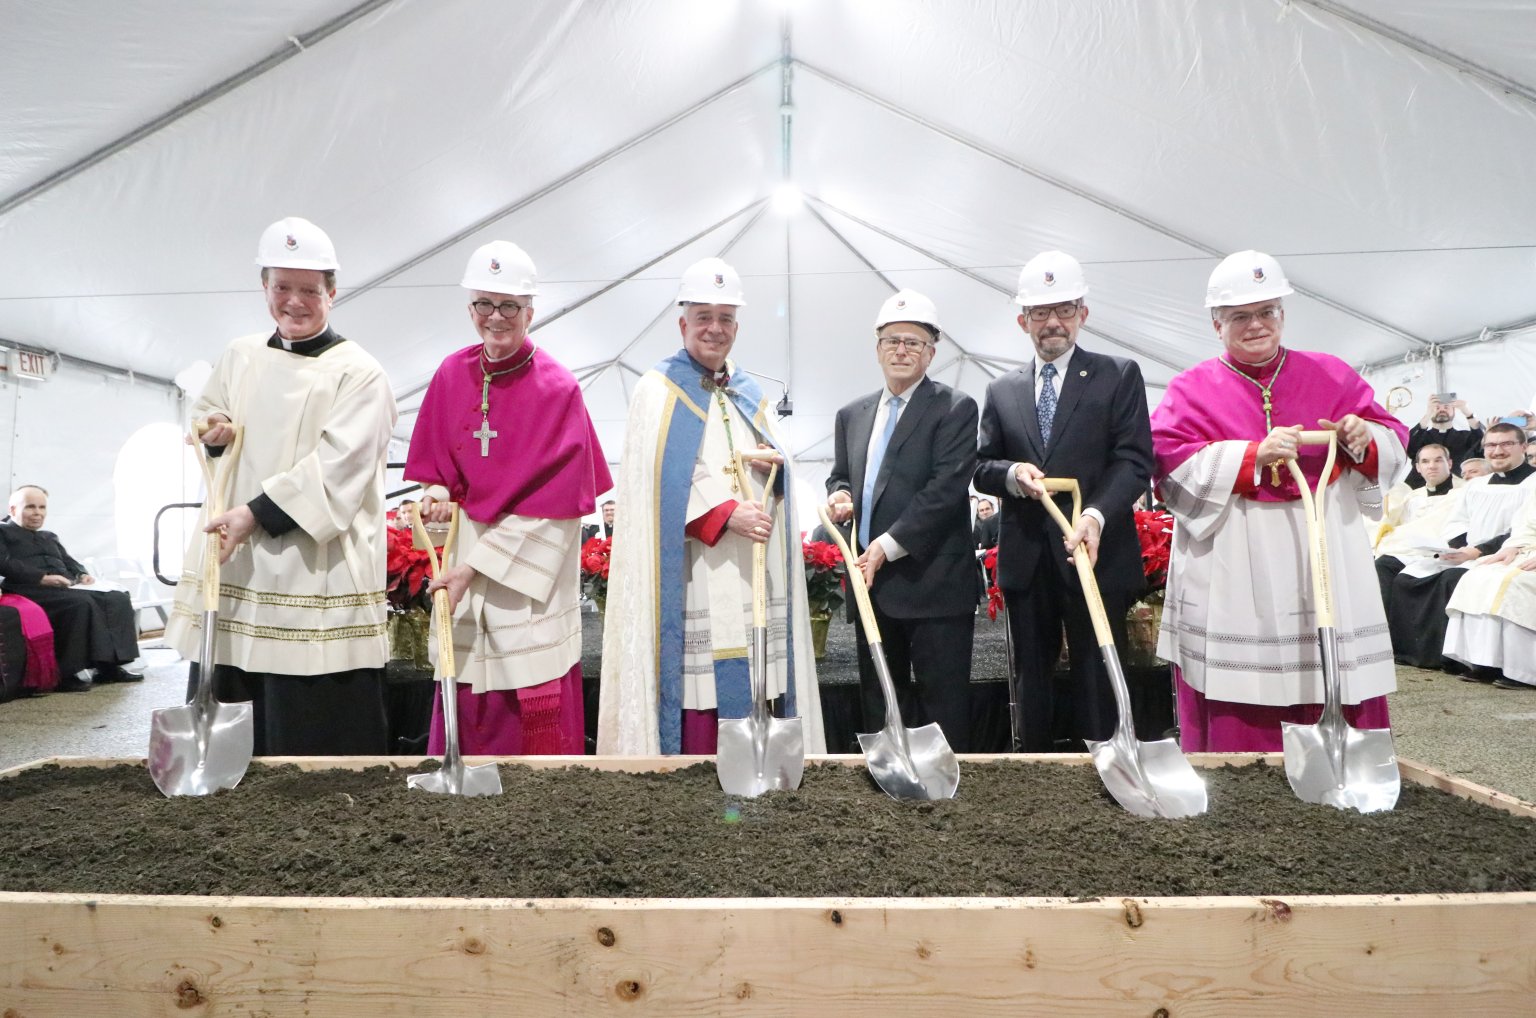 December 8, 2022 - The official groundbreaking of the Lower Gwynedd campus.